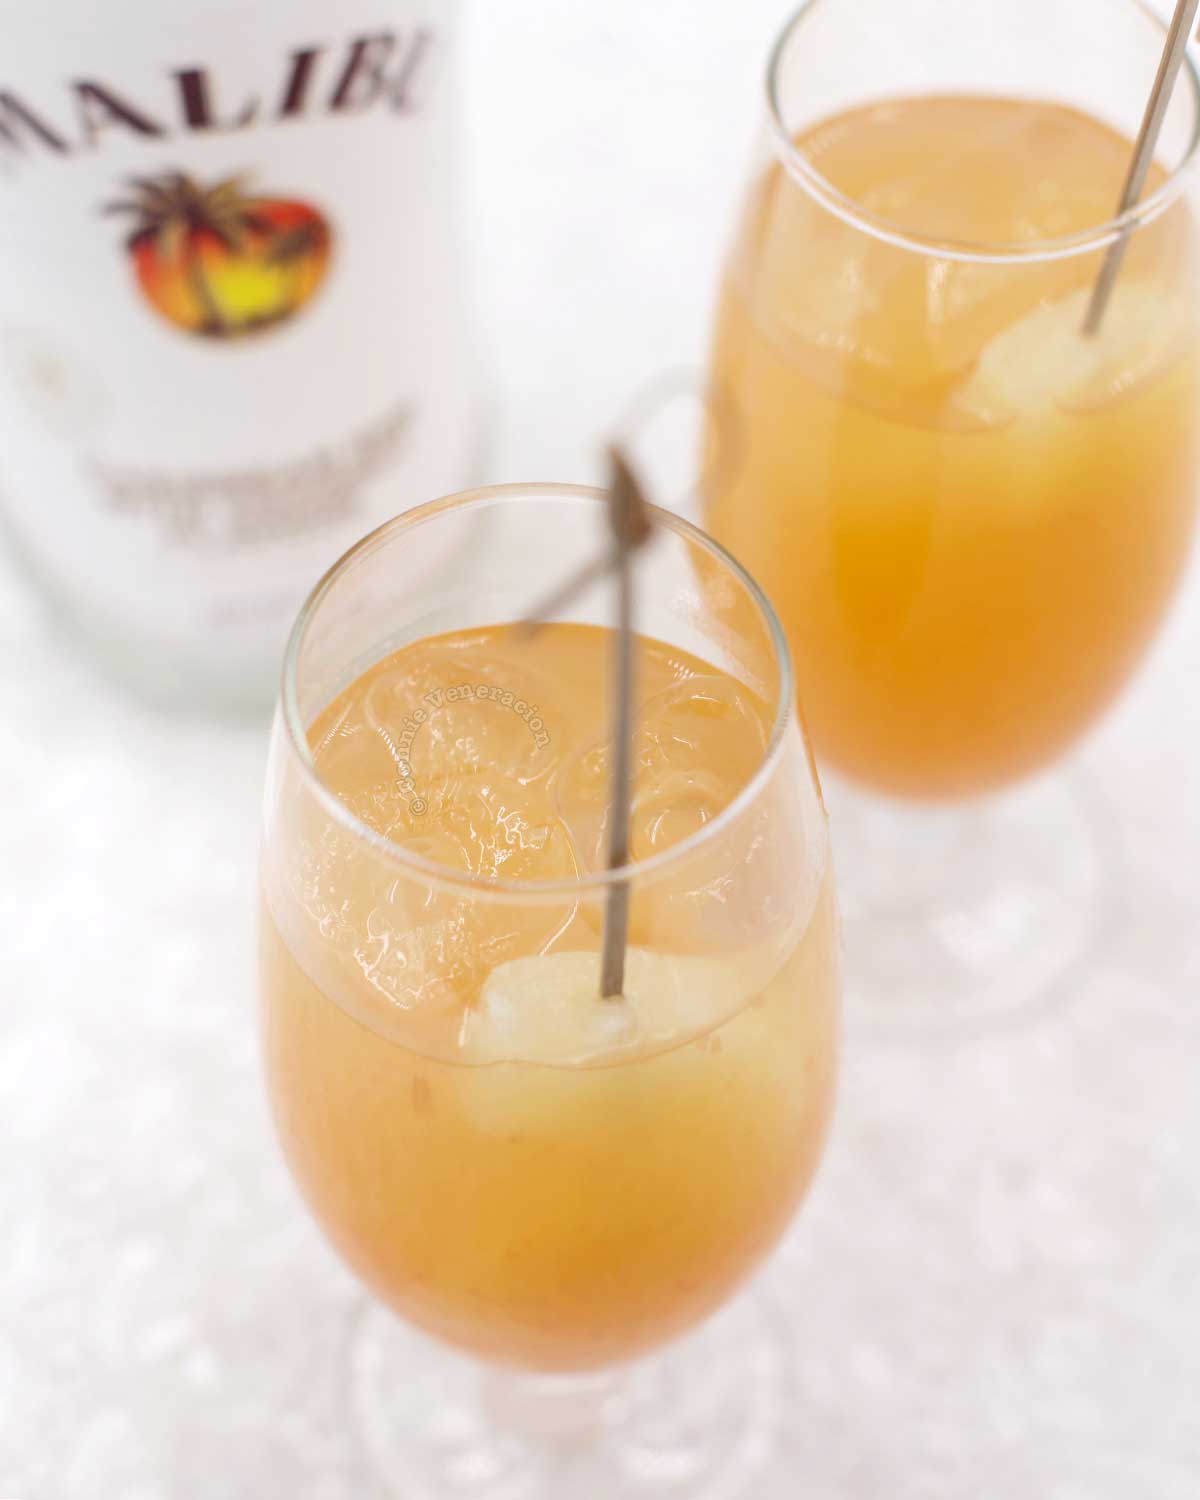 Pineapple, grapefruit and coconut rum cocktail